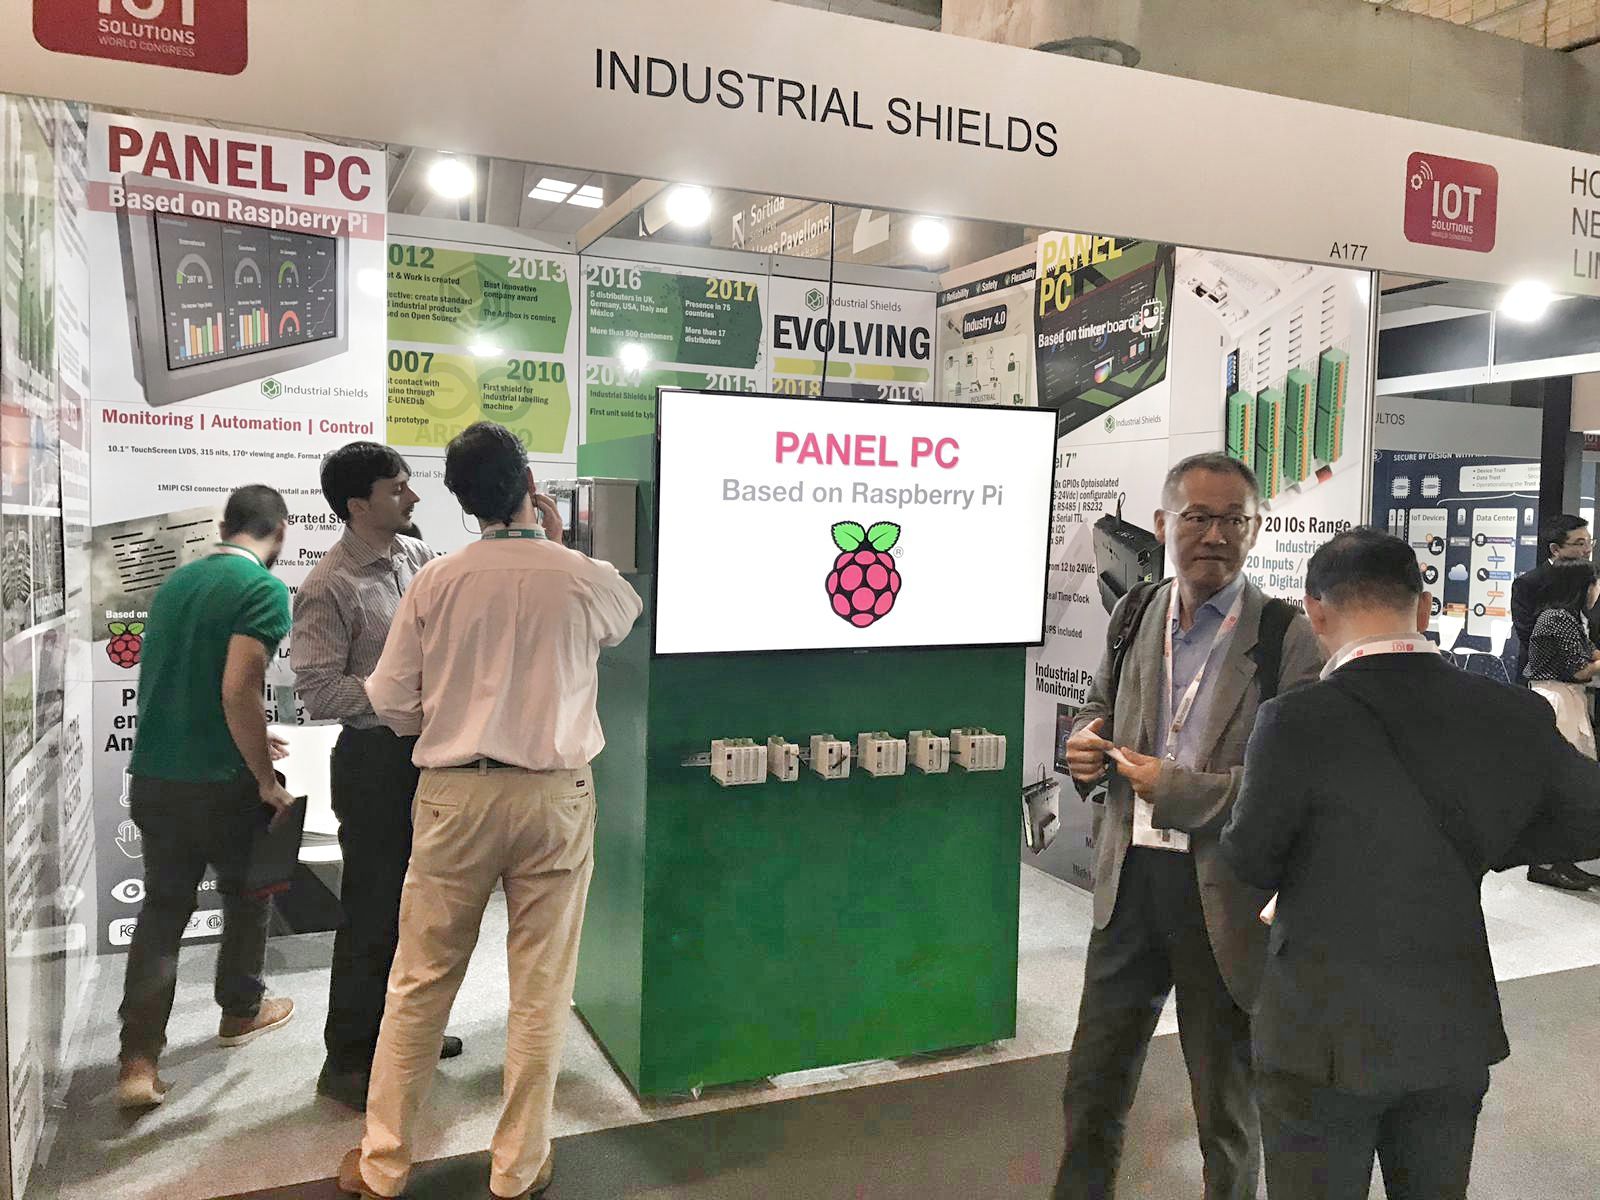 Industrial Shields's stand at IOTSWC2019